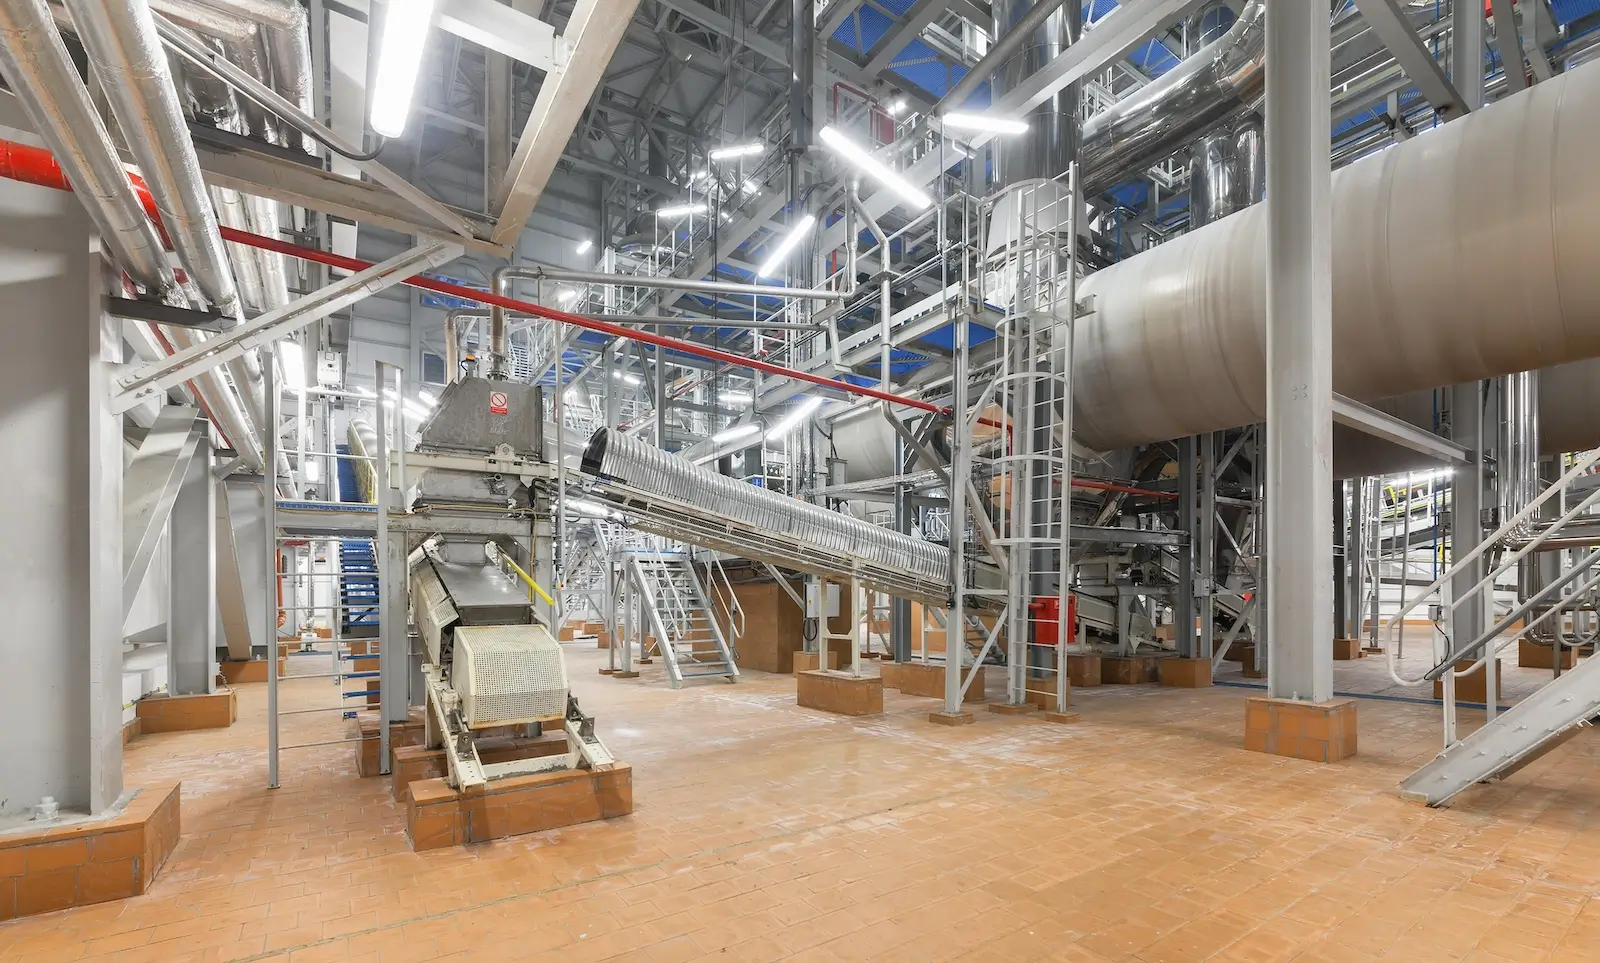 Inside of a chemical production plant